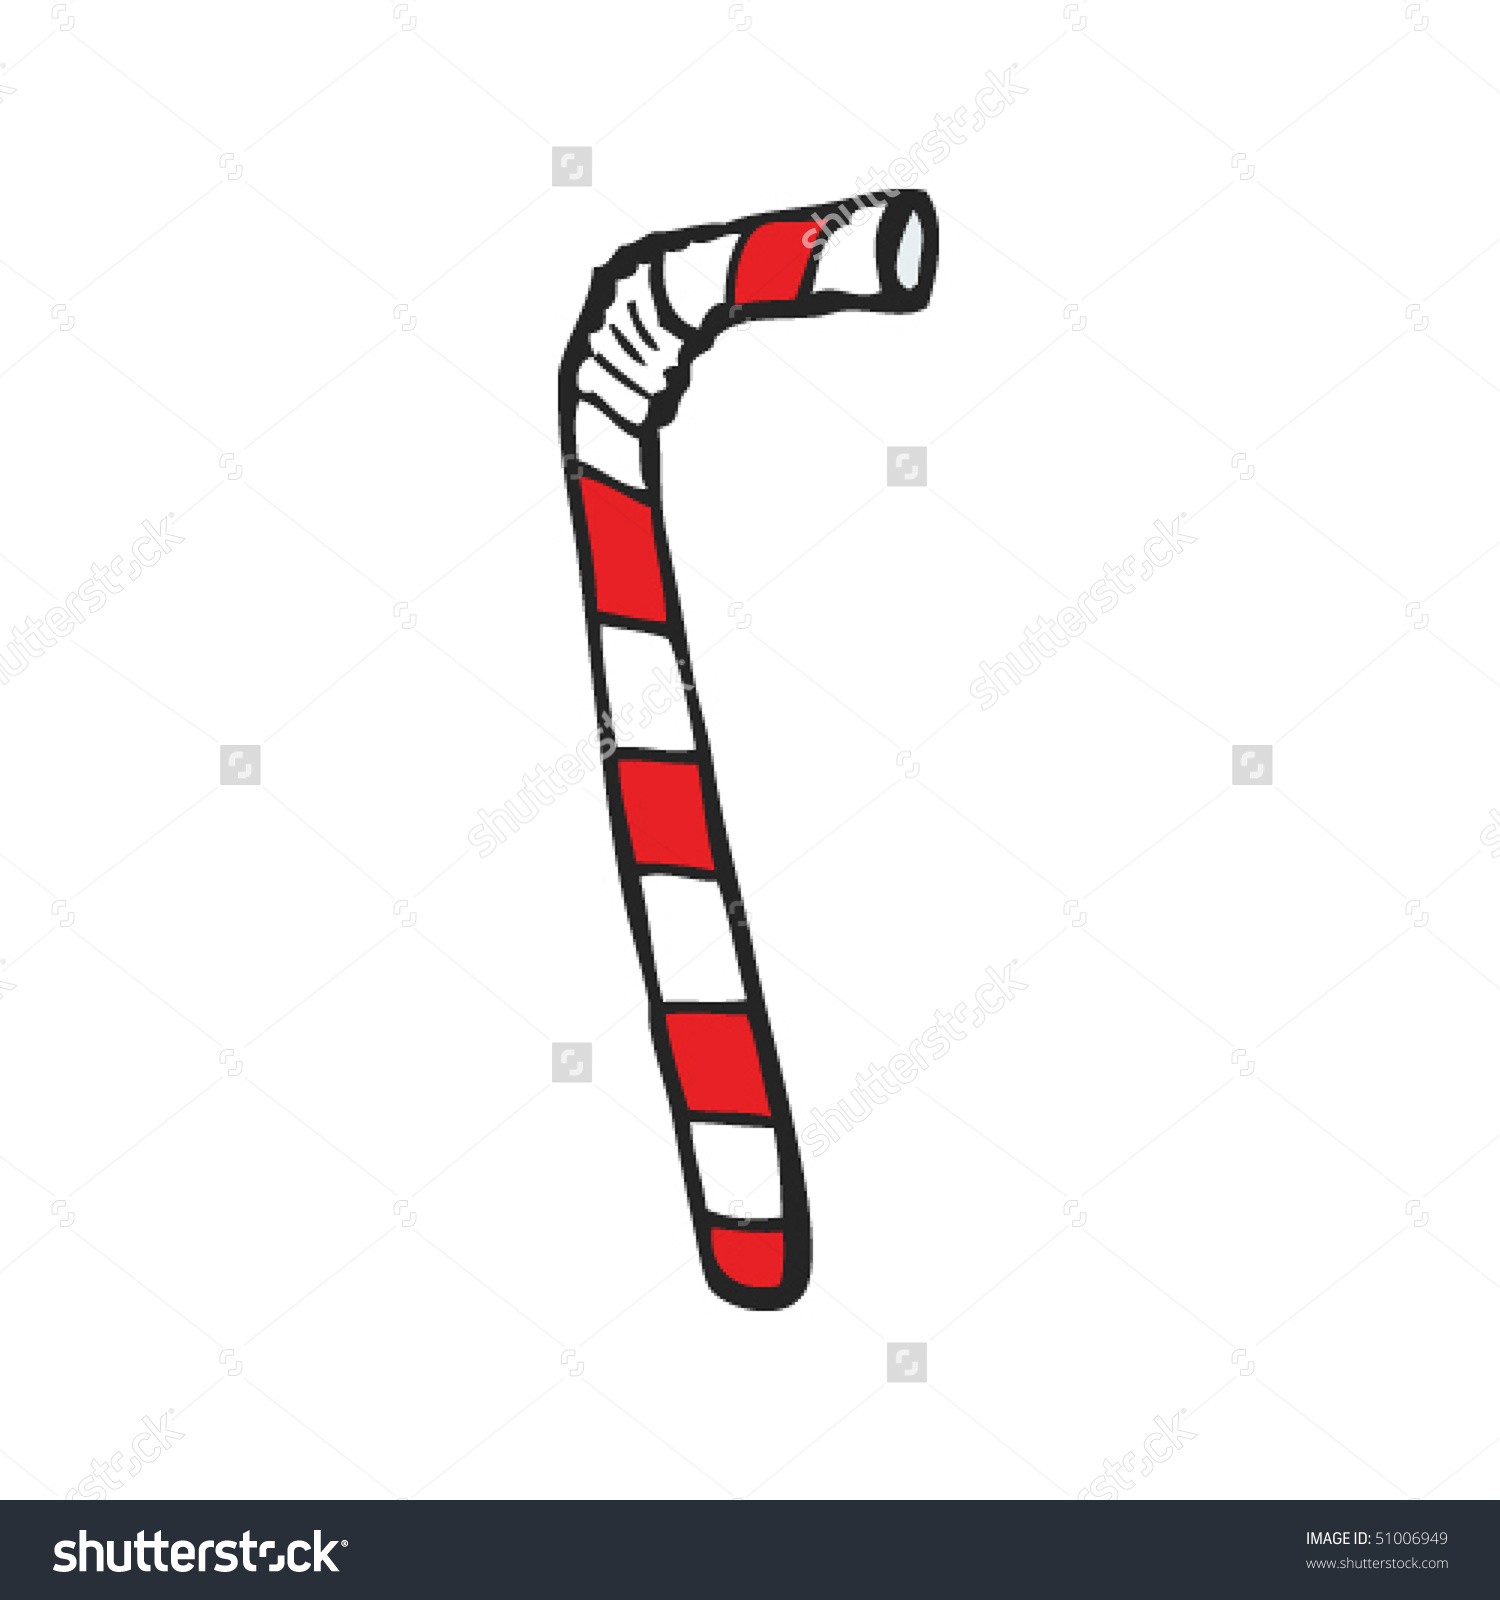 Bendy Straw Clipart.